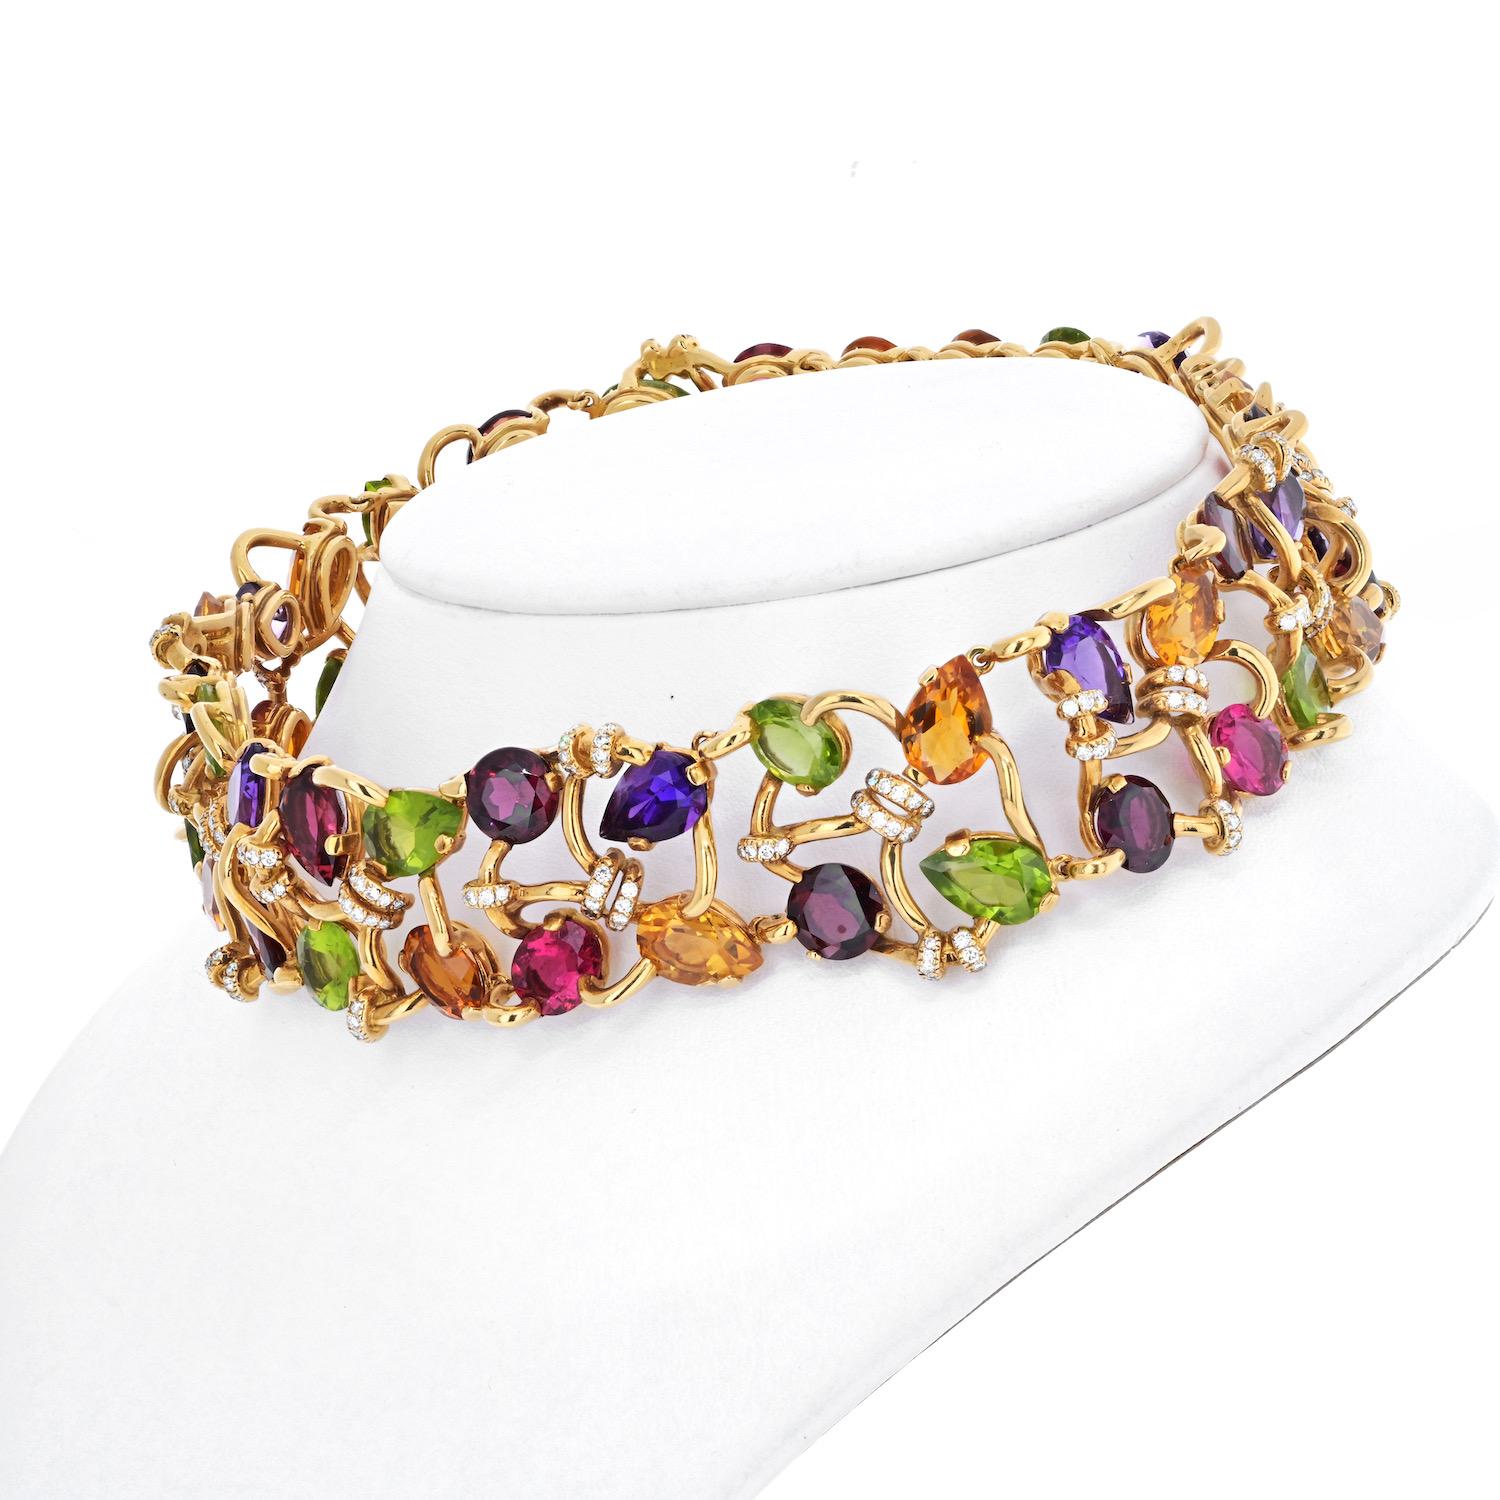 Stunning multicolor gemstone necklace crafted in 18K yellow gold by Chanel. Fits like a collar around your neck making a glamorous statement. Show off your beautiful neck, your fierce sense of style and a winning spirit when you put this important